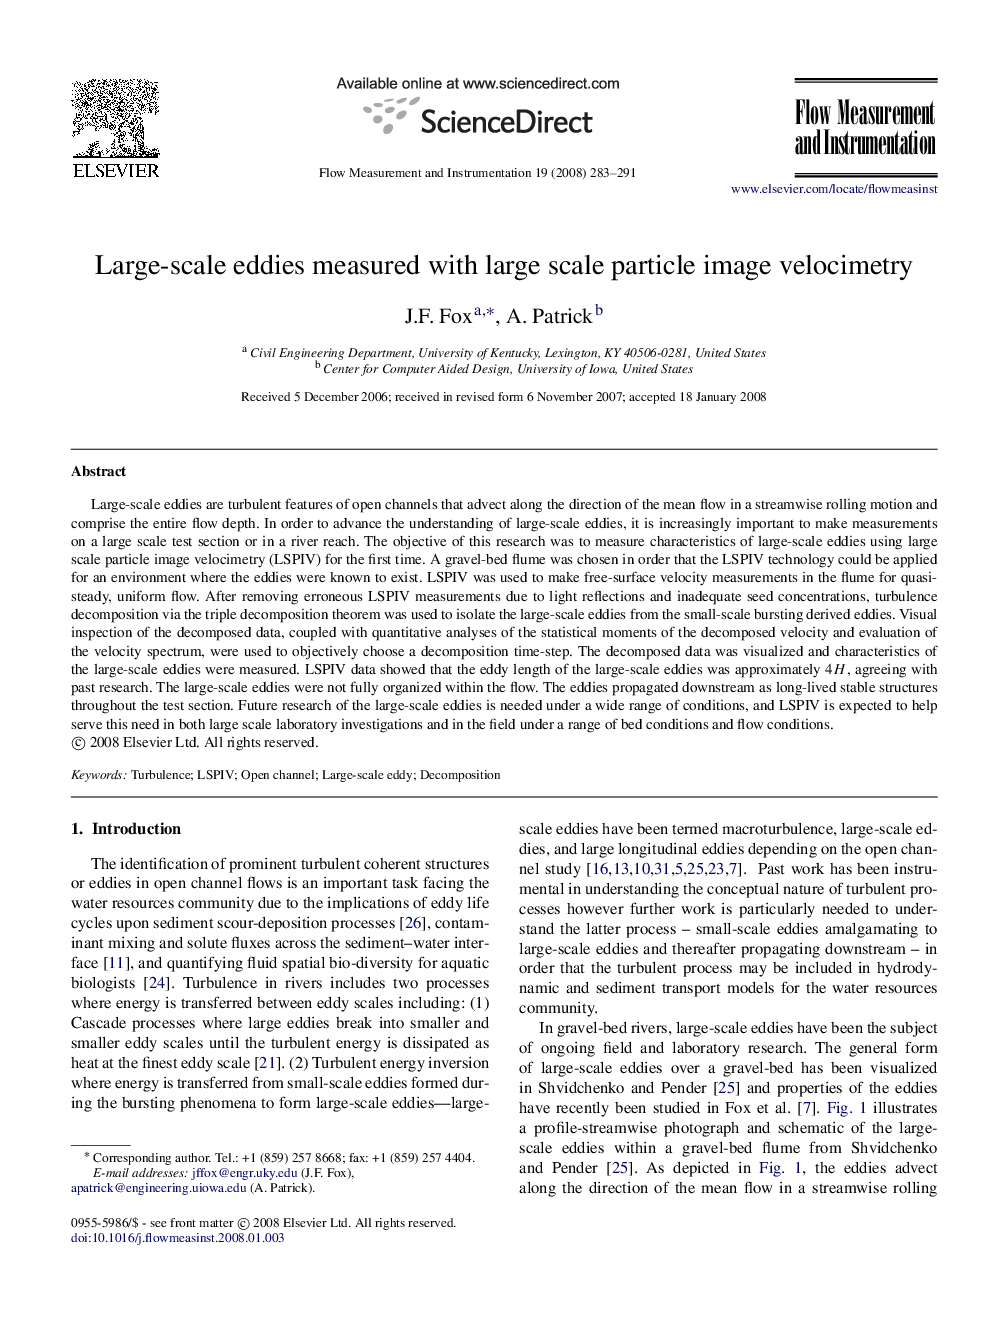 Large-scale eddies measured with large scale particle image velocimetry